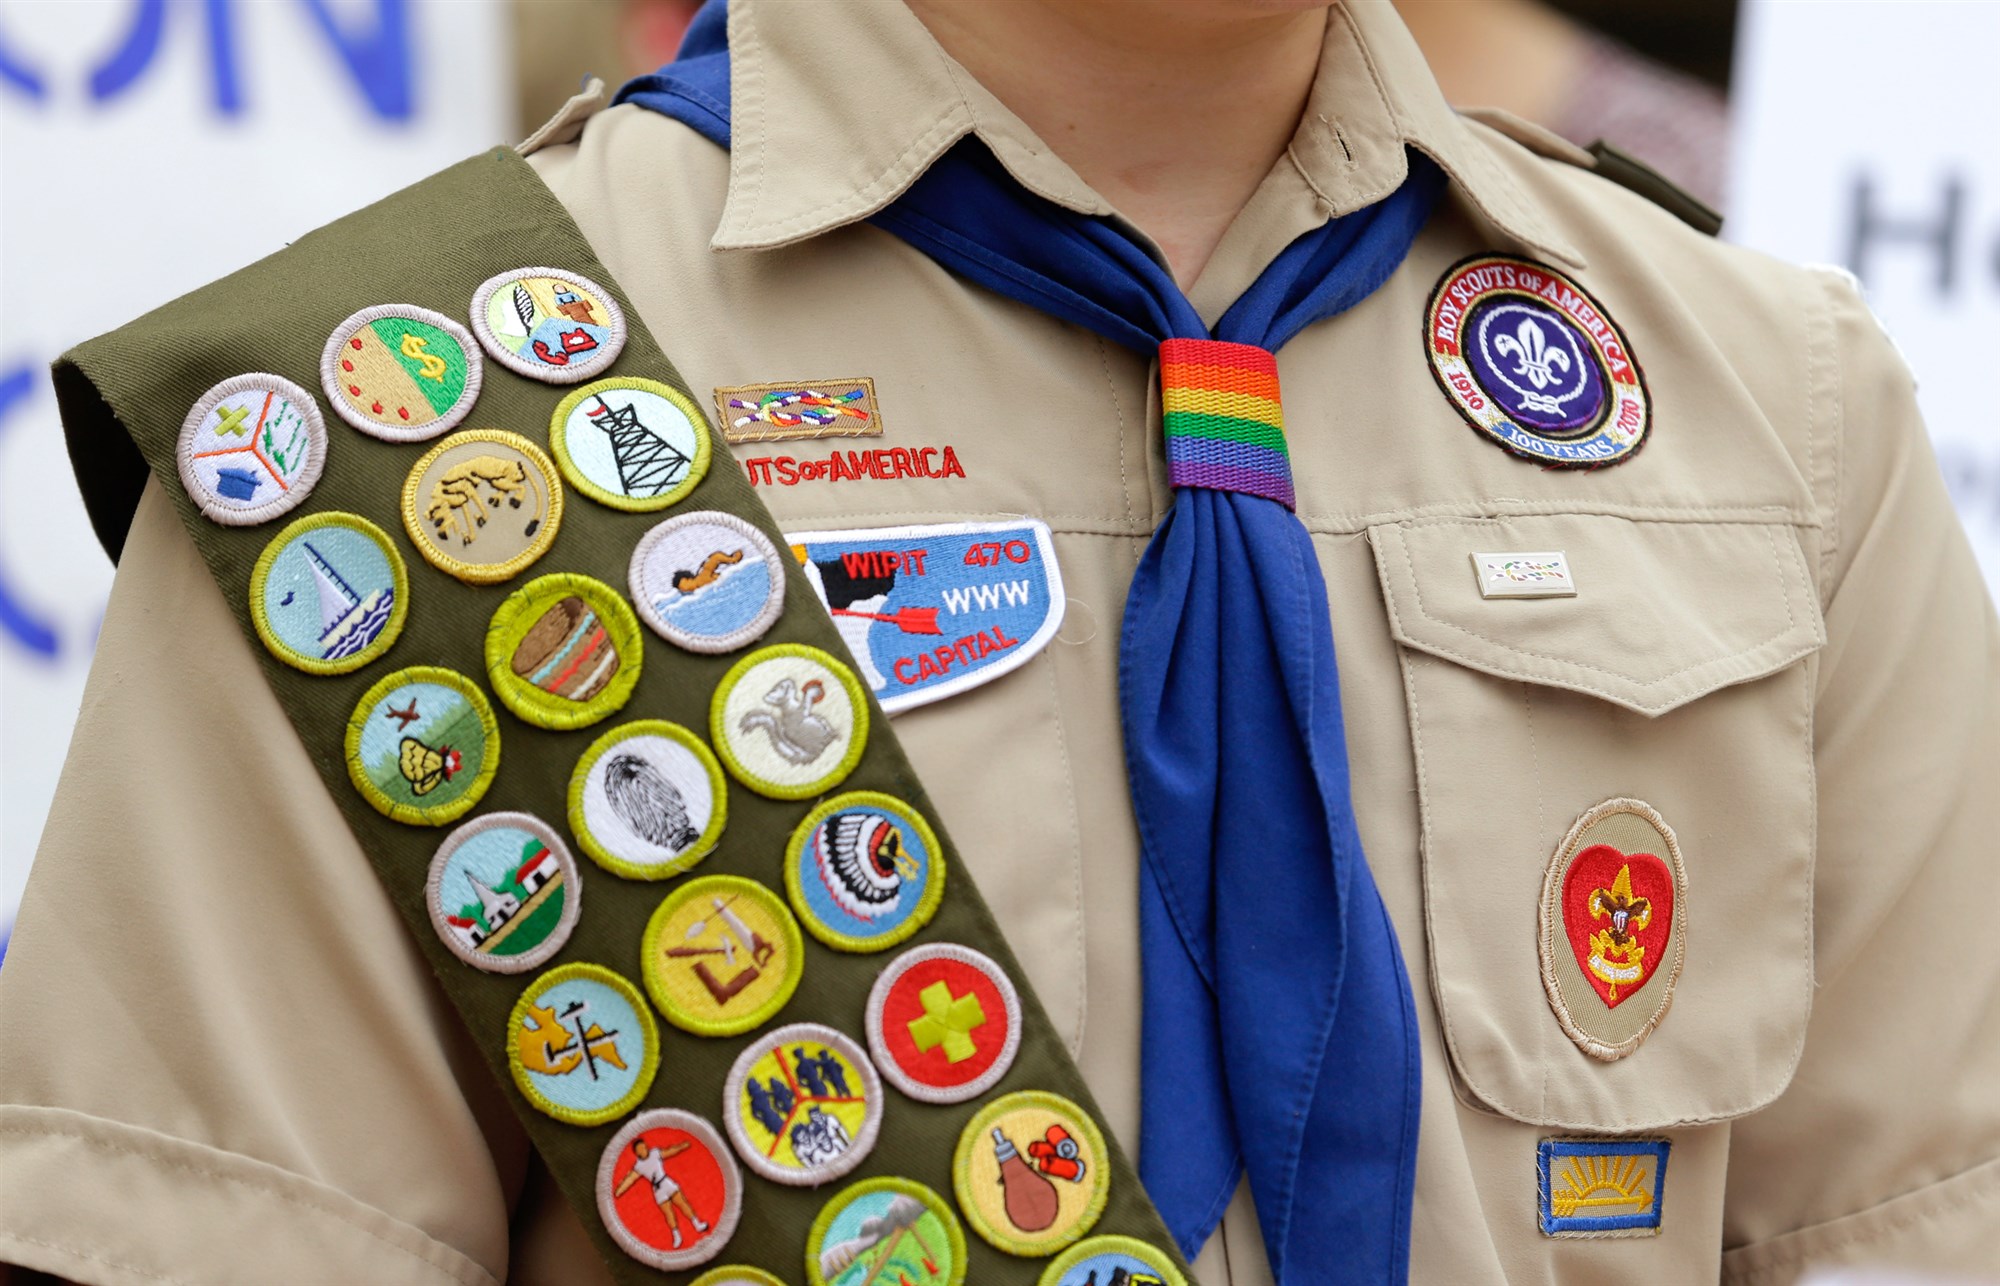 In the News: Portland plays big role in Boy Scouts’ virtual camp-in